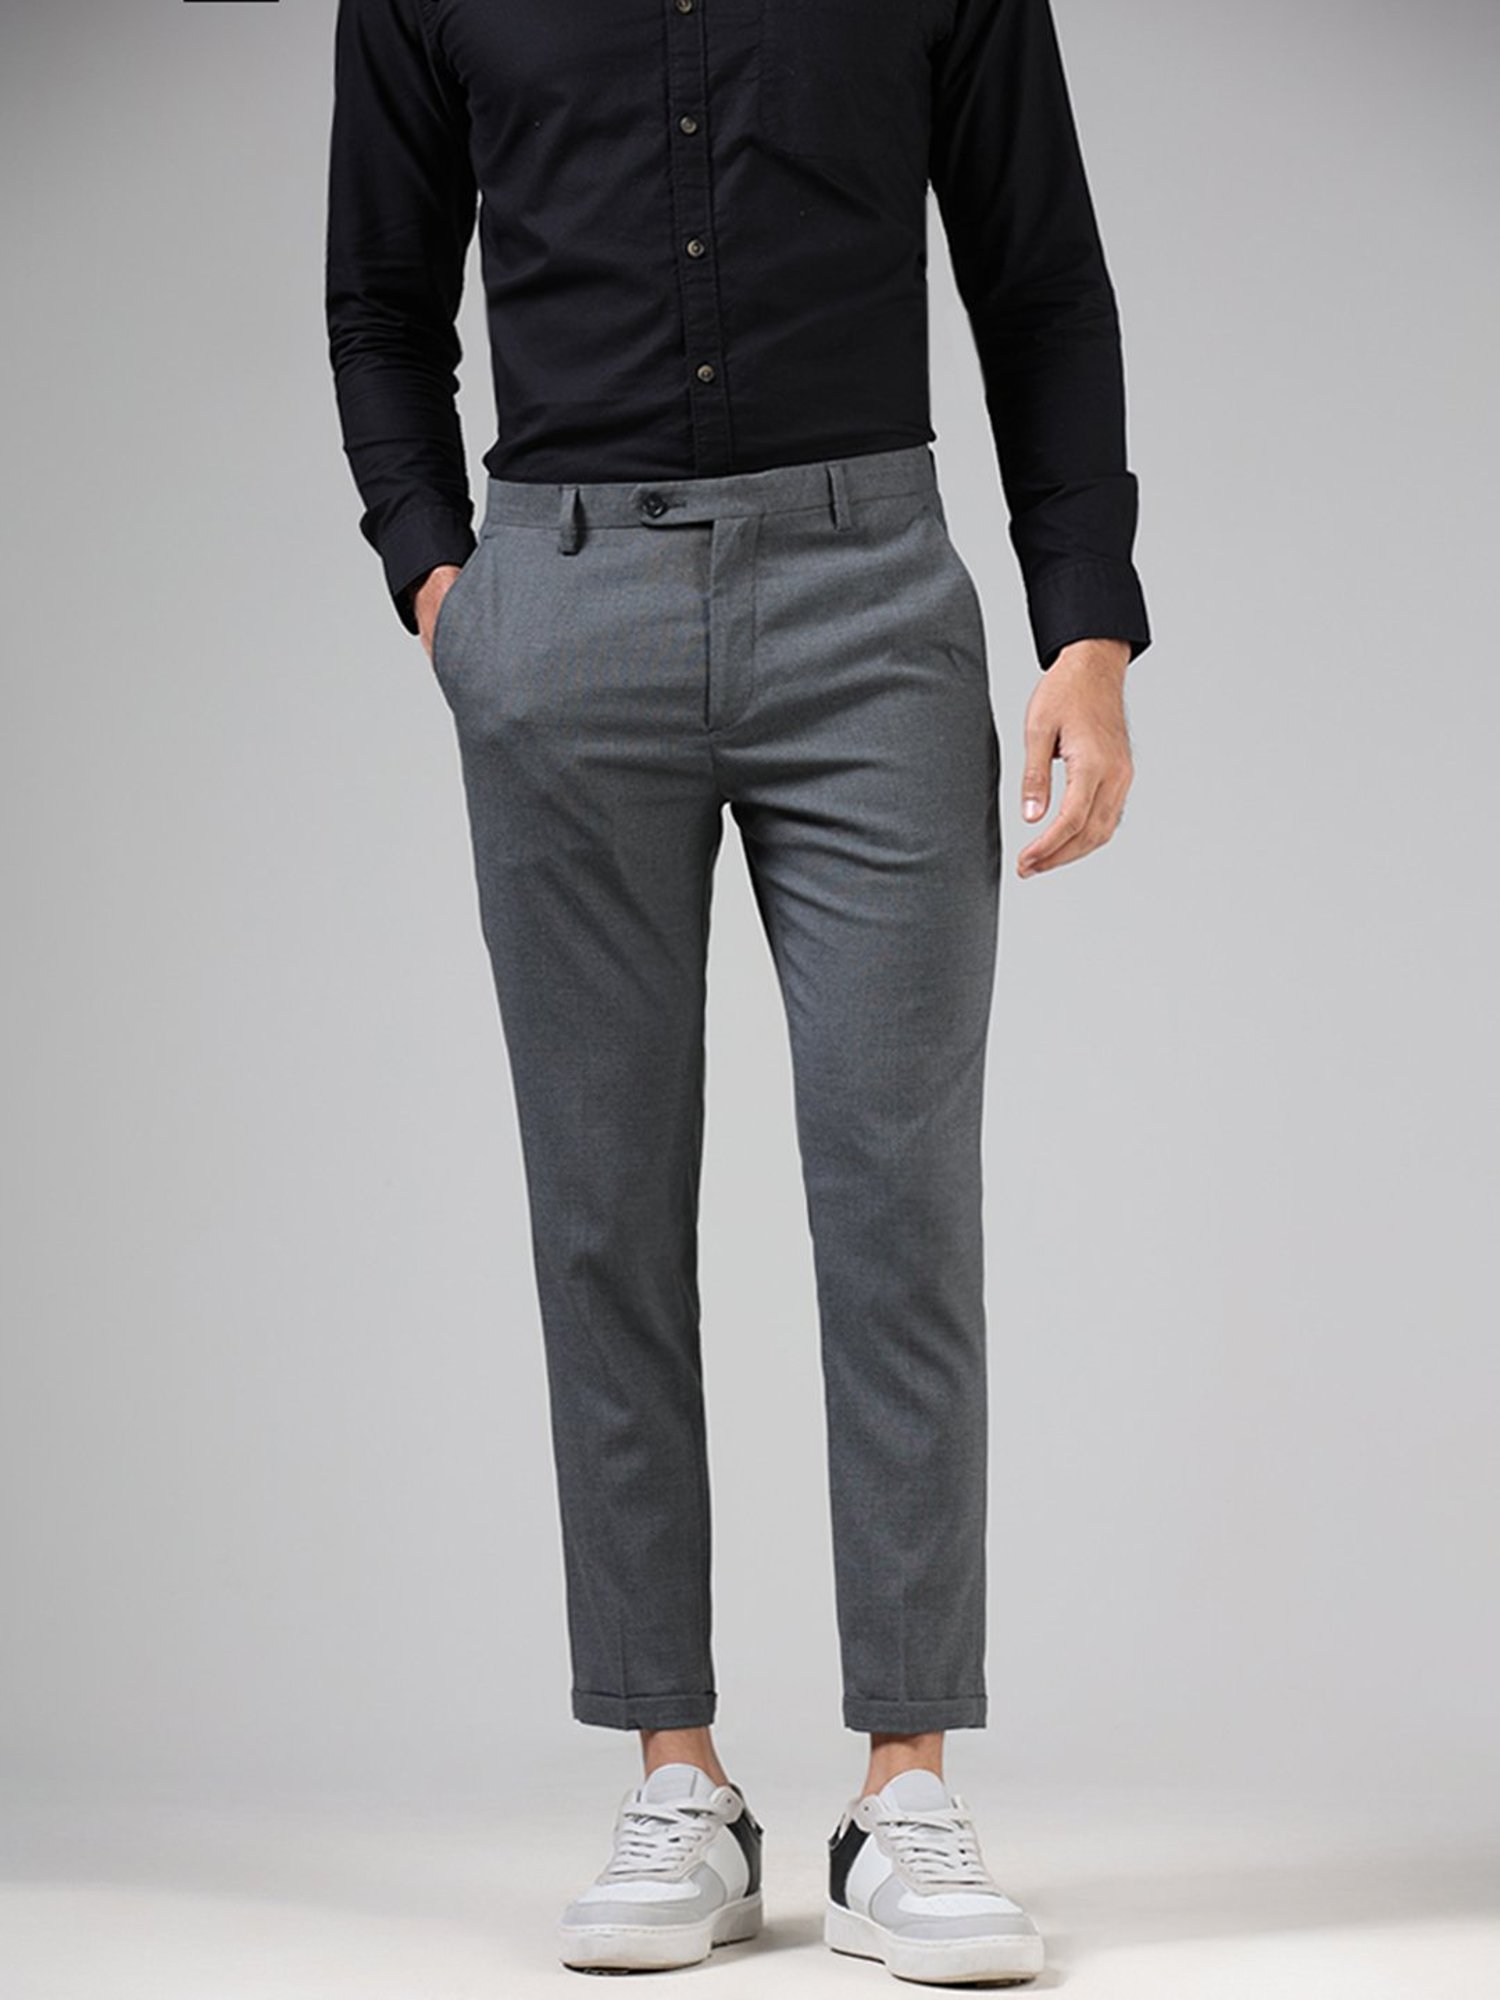 Buy WES Formals Black Checkered Carrot-Fit Trousers from Westside